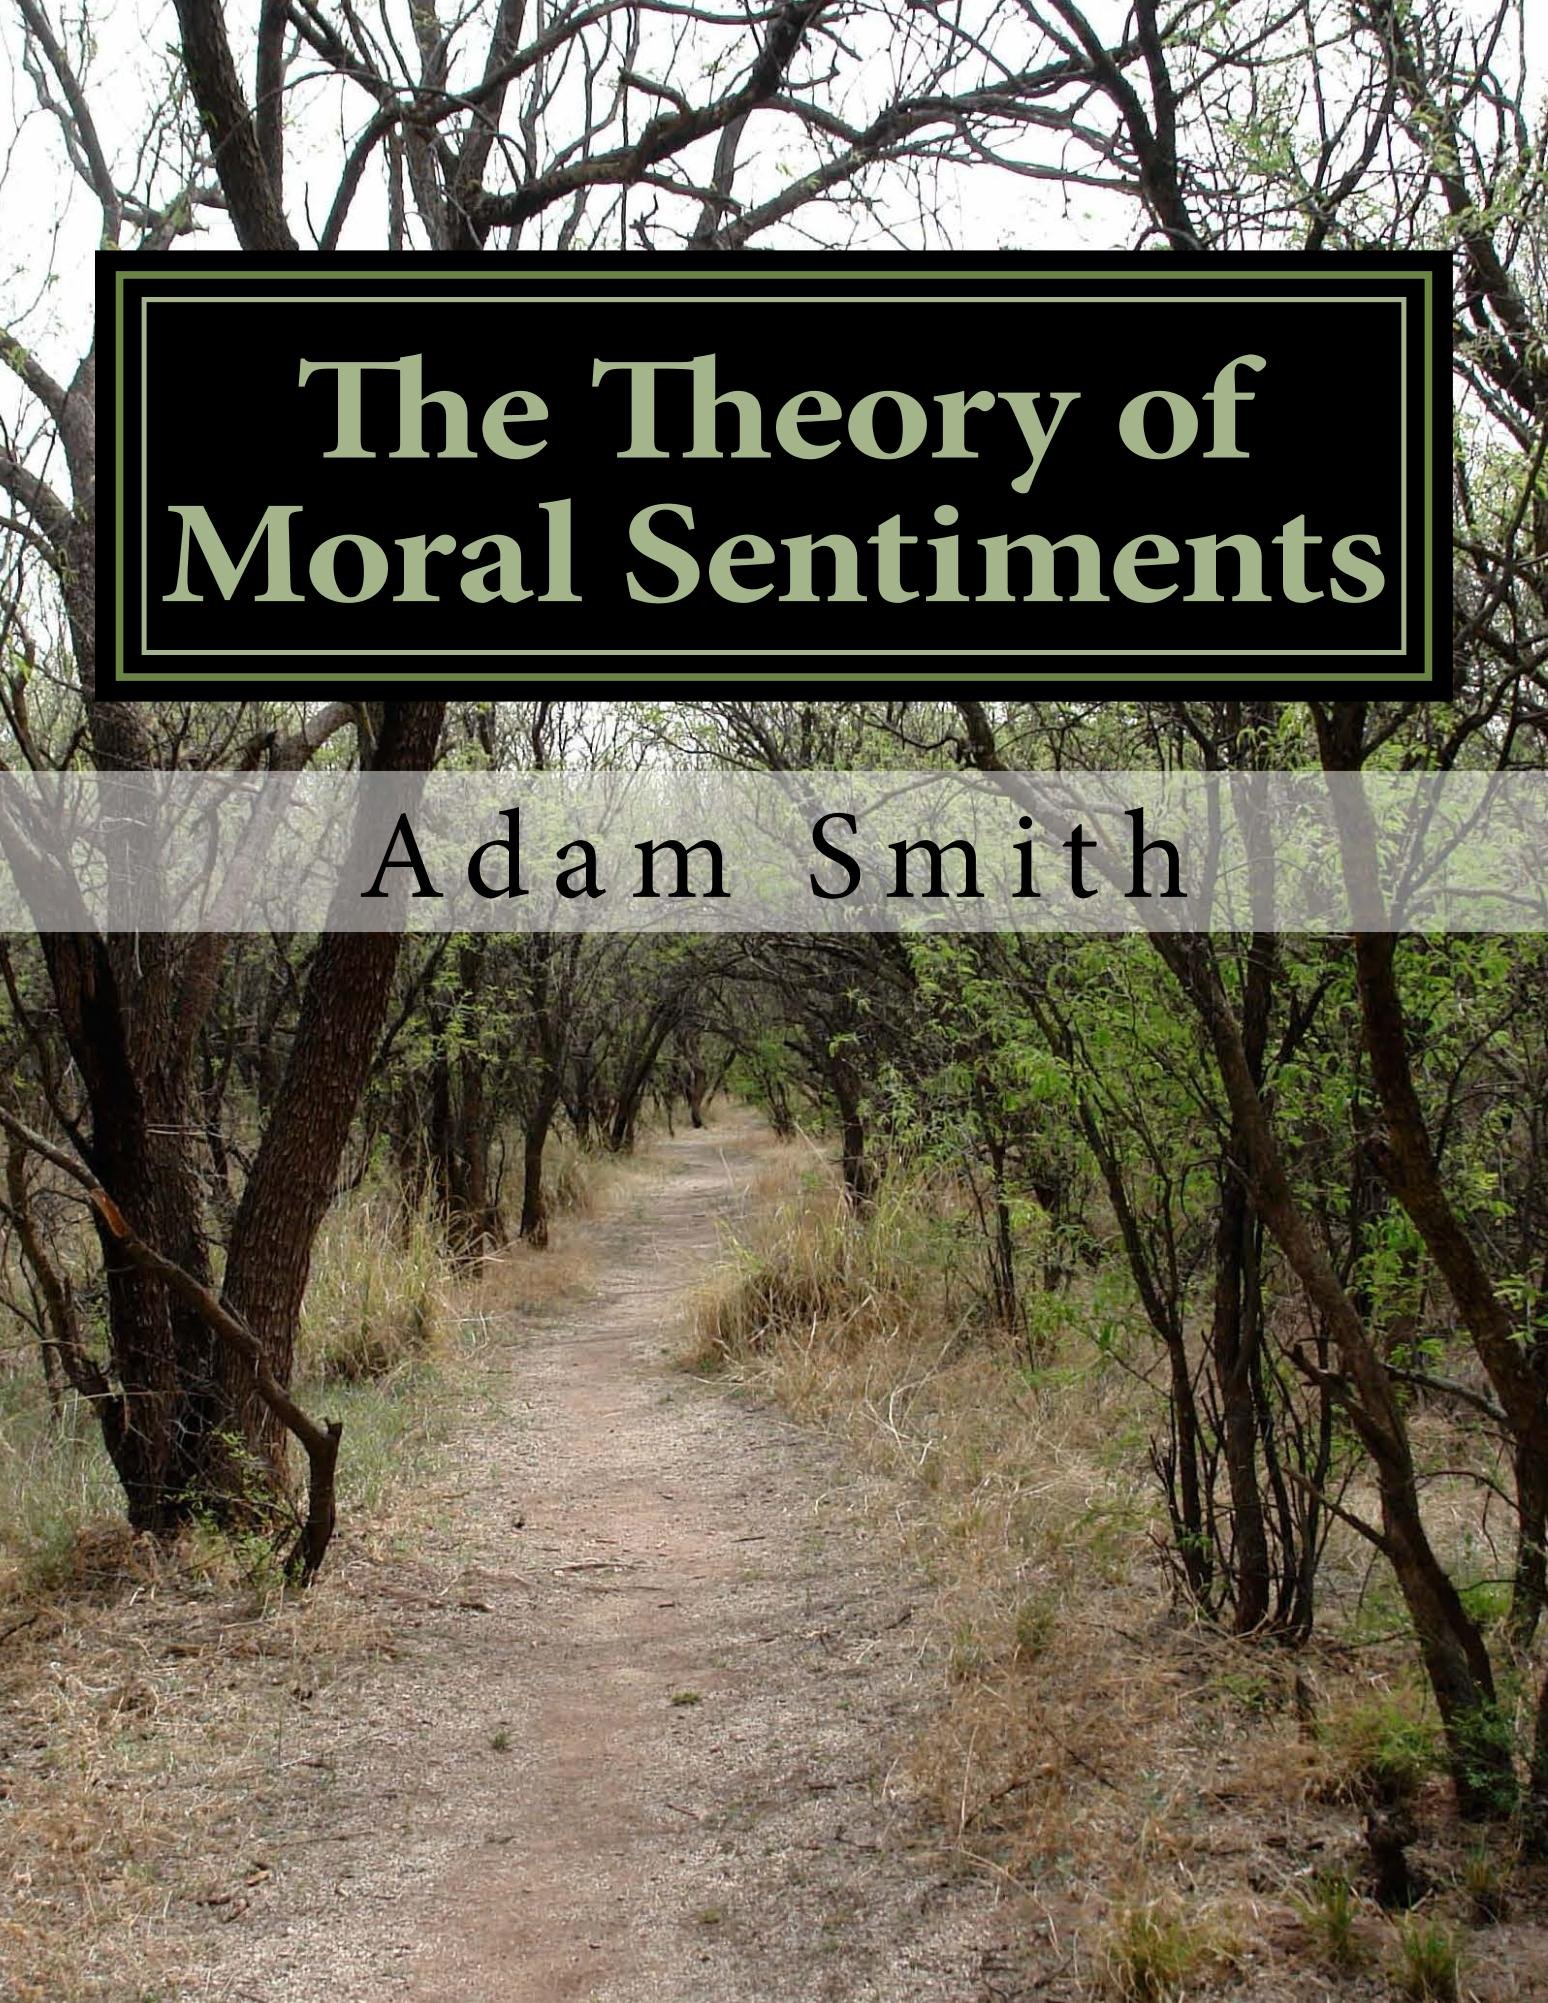 The Theory of Moral Sentiments (Economics Book 1)